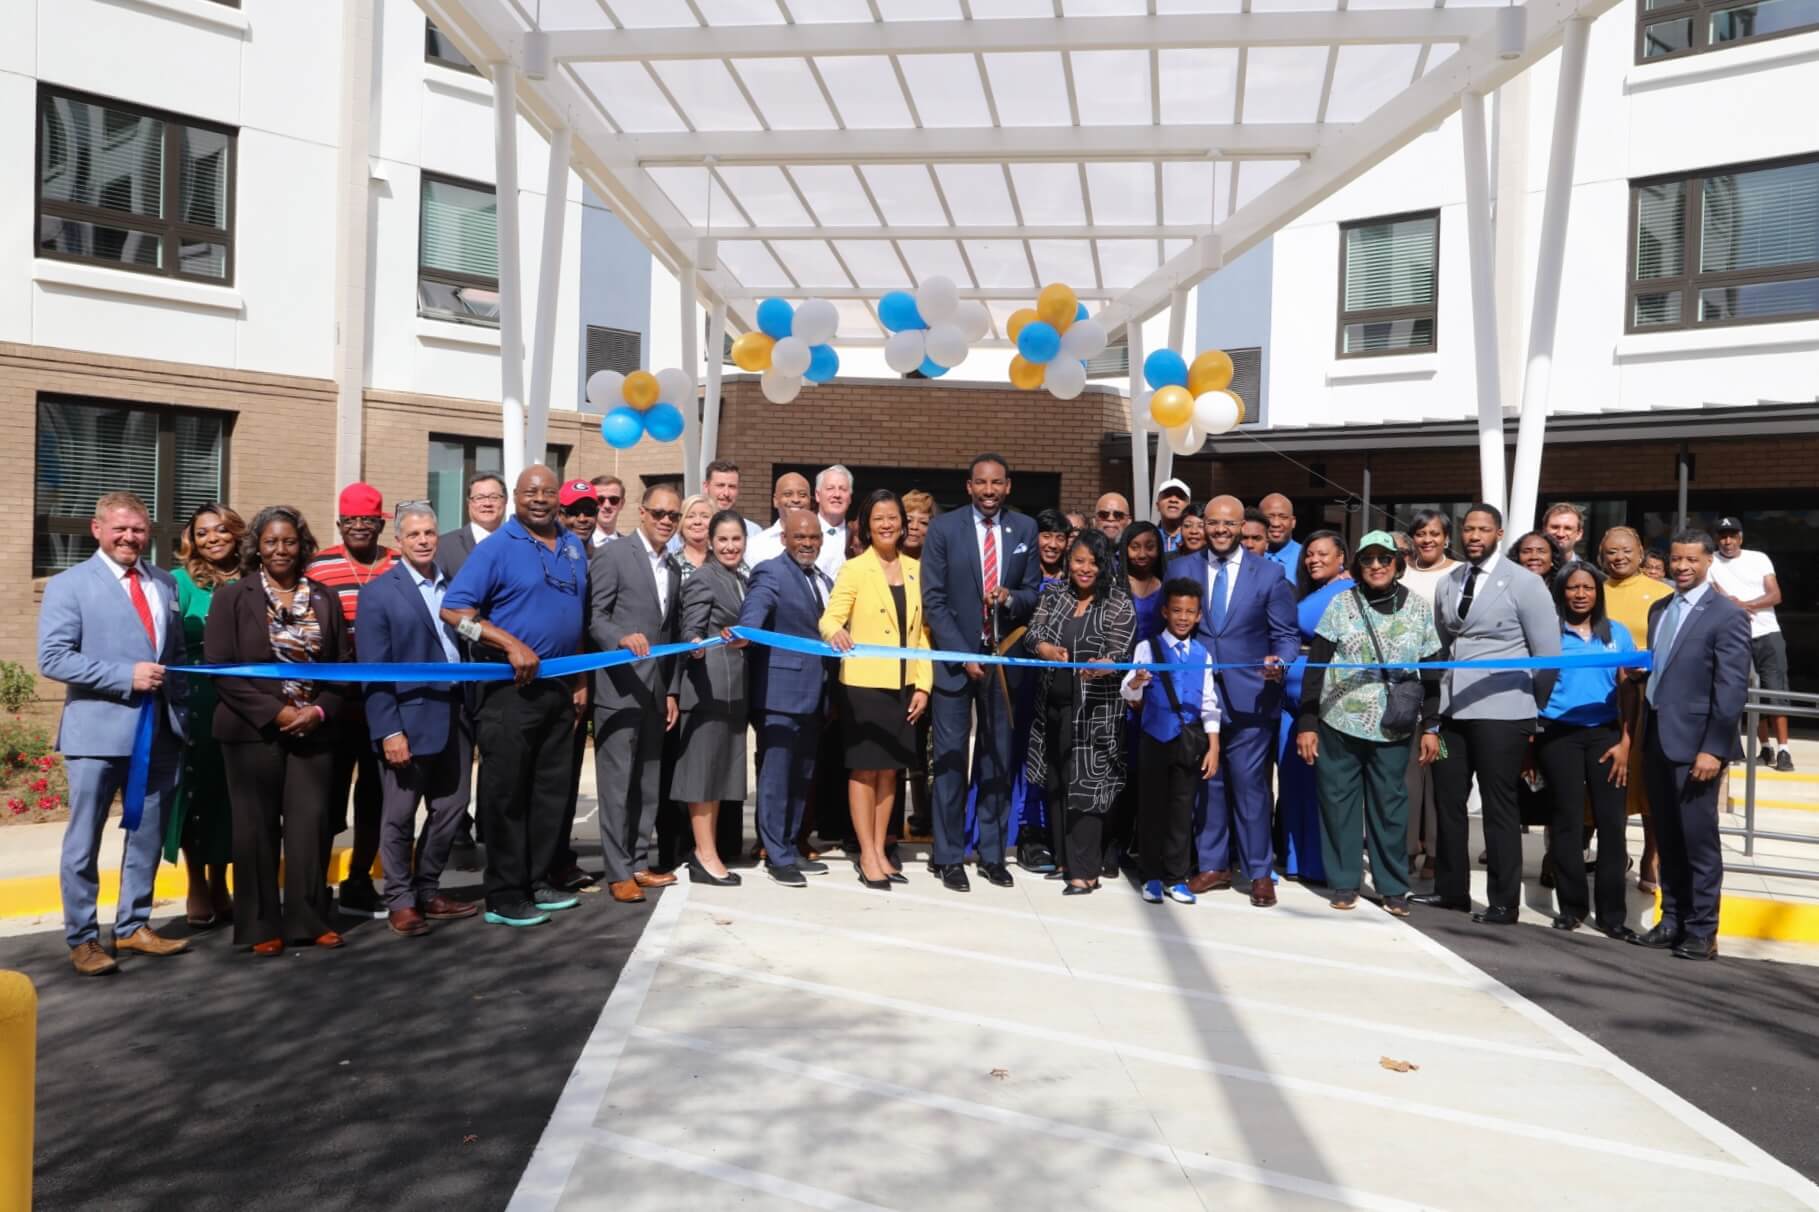 Columbia Residential celebrates the renovation of James Allen Jr. Place, formerly Hightower Manor Apartments, in Atlanta